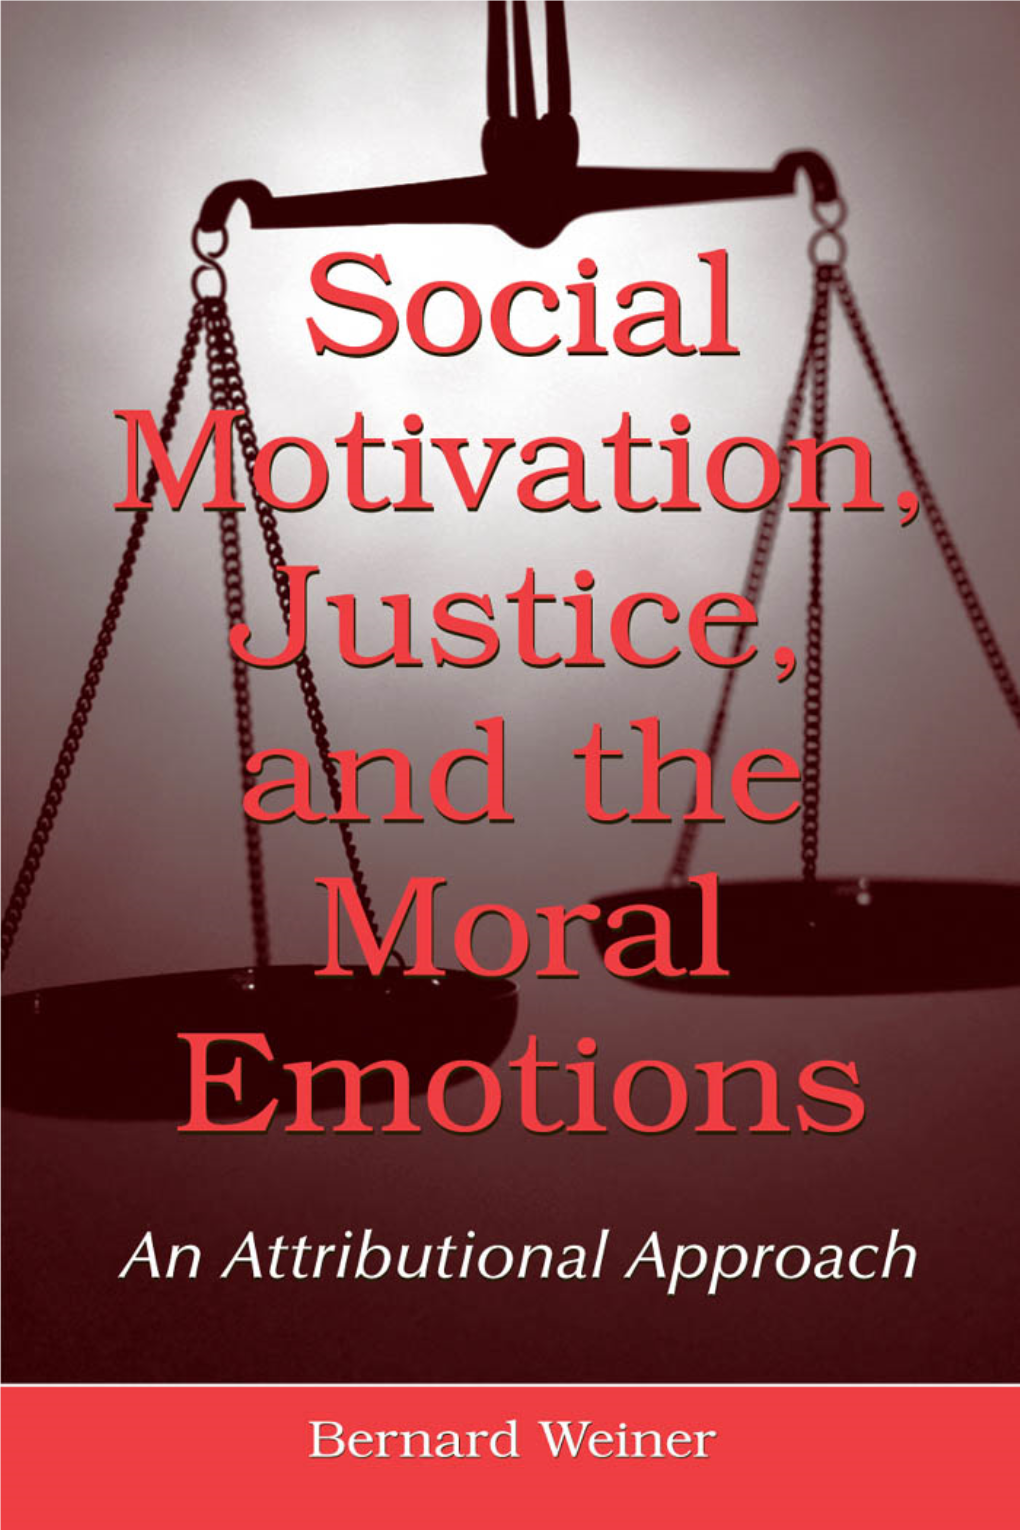 Social Motivation, Justice, and the Moral Emotions : an Attributional Approach / Bernard Weiner